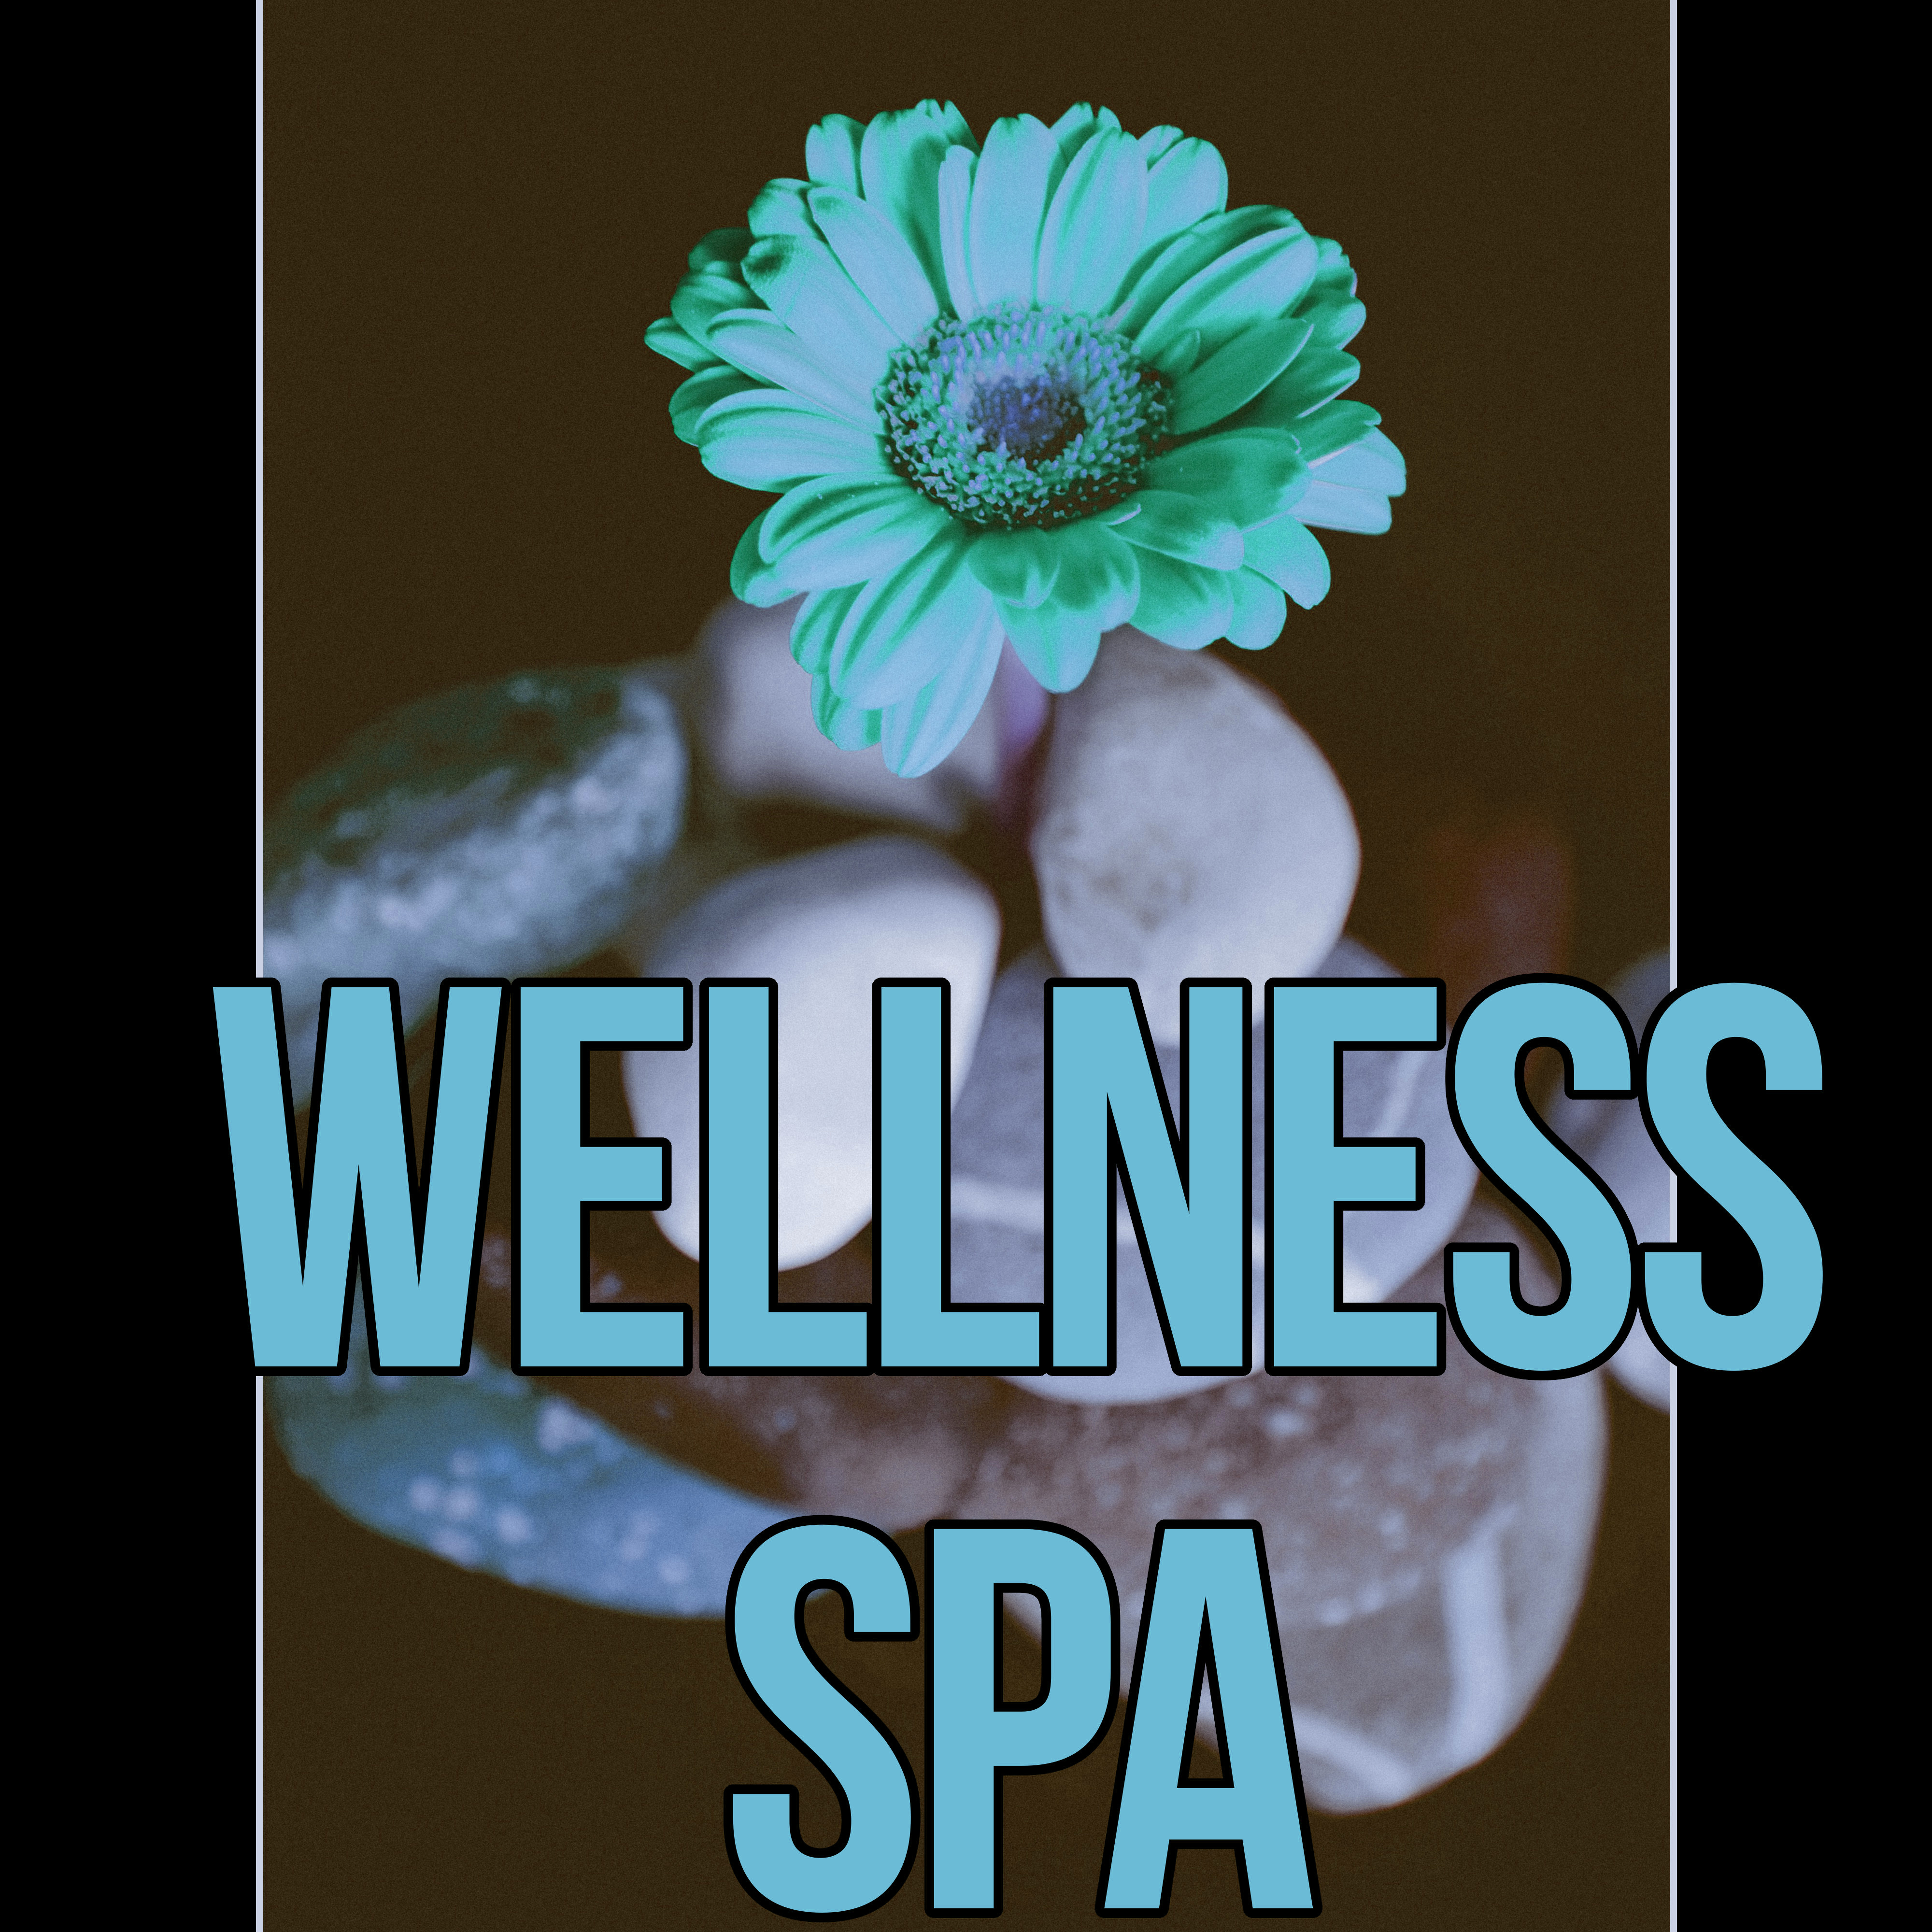 Wellness Spa - Massage & Spa Music, Serenity Relaxing Spa Music, Instrumental Music for Massage Therapy, Piano Music and Sounds of Nature Music for Relaxation, New Age Reiki